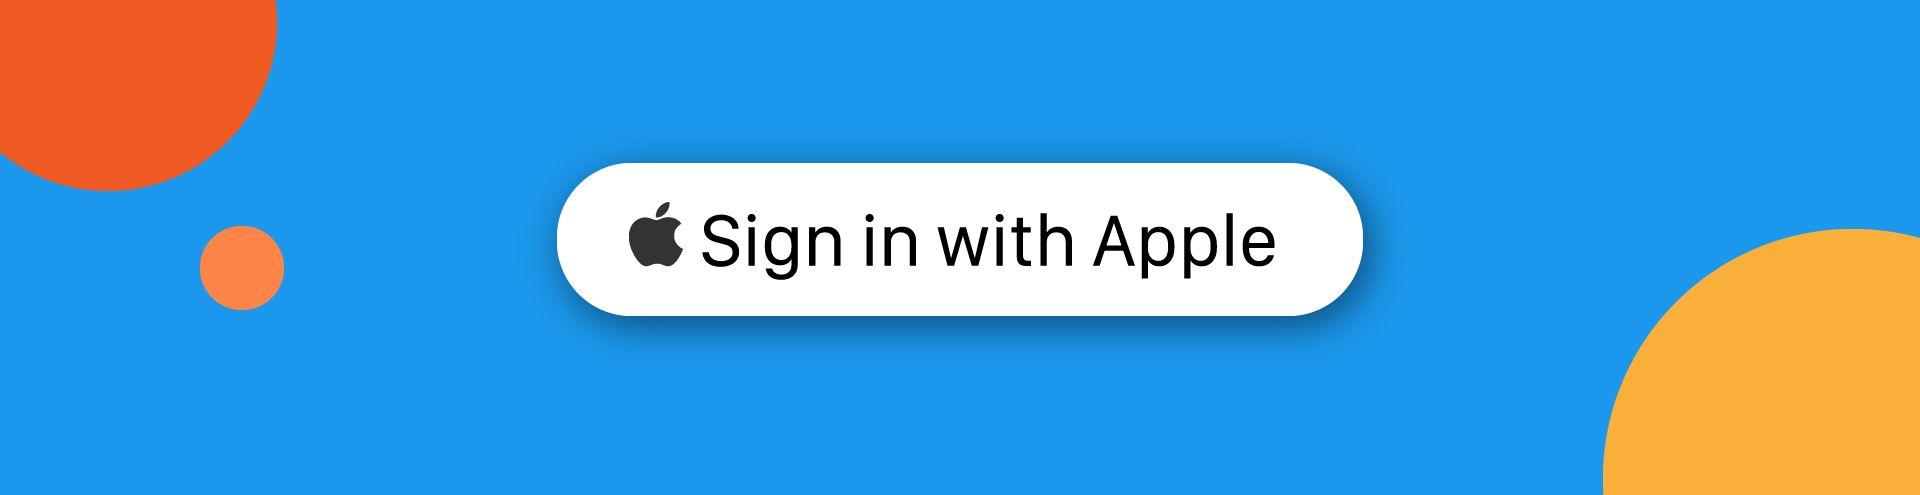 Sign In with Apple: Optimize Your App with New Functionality